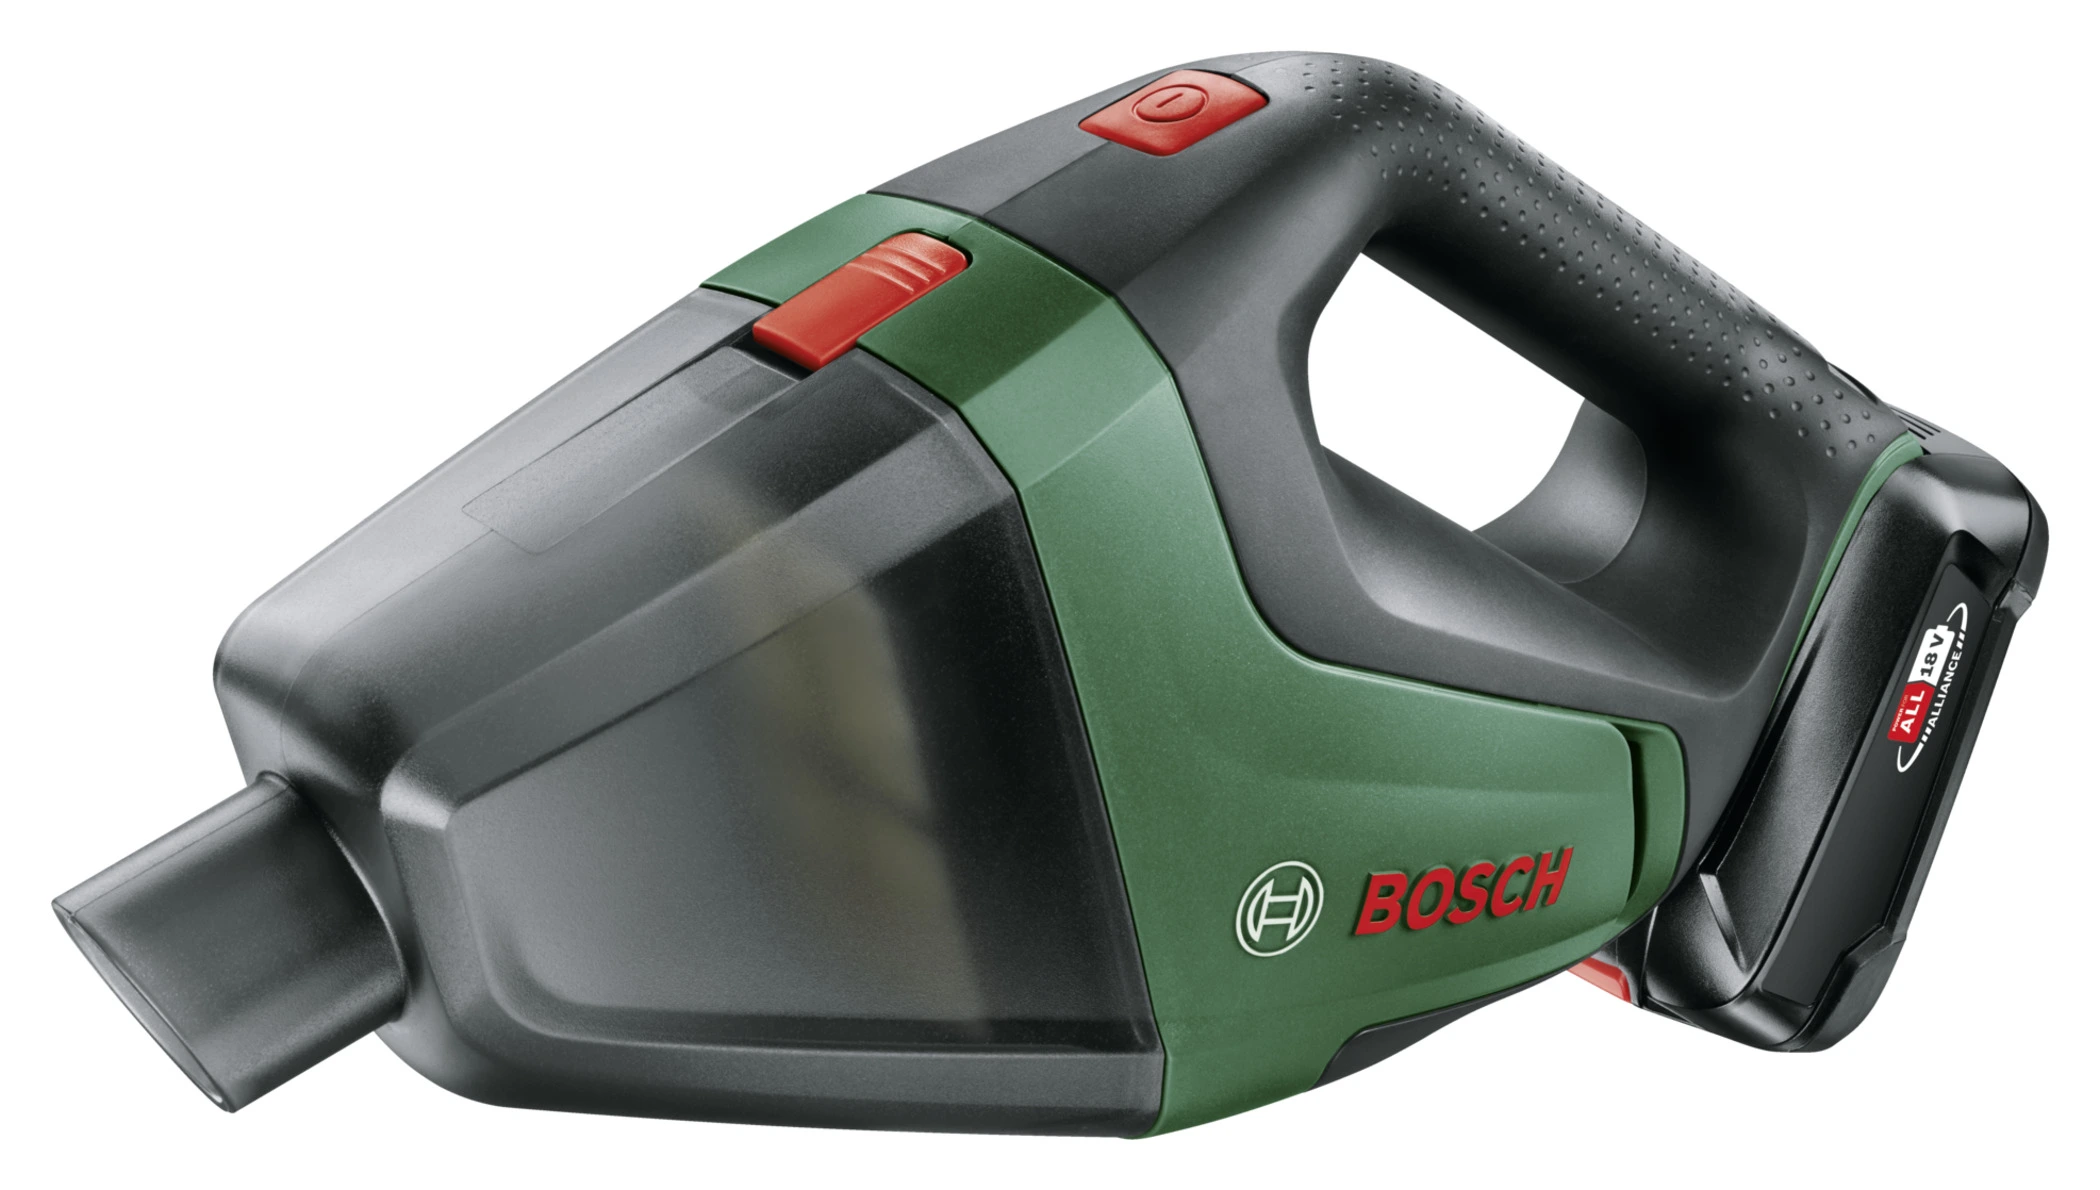 Bosch UniversalVac 18V Cordless Vacuum Cleaner with 2.5 Ah battery